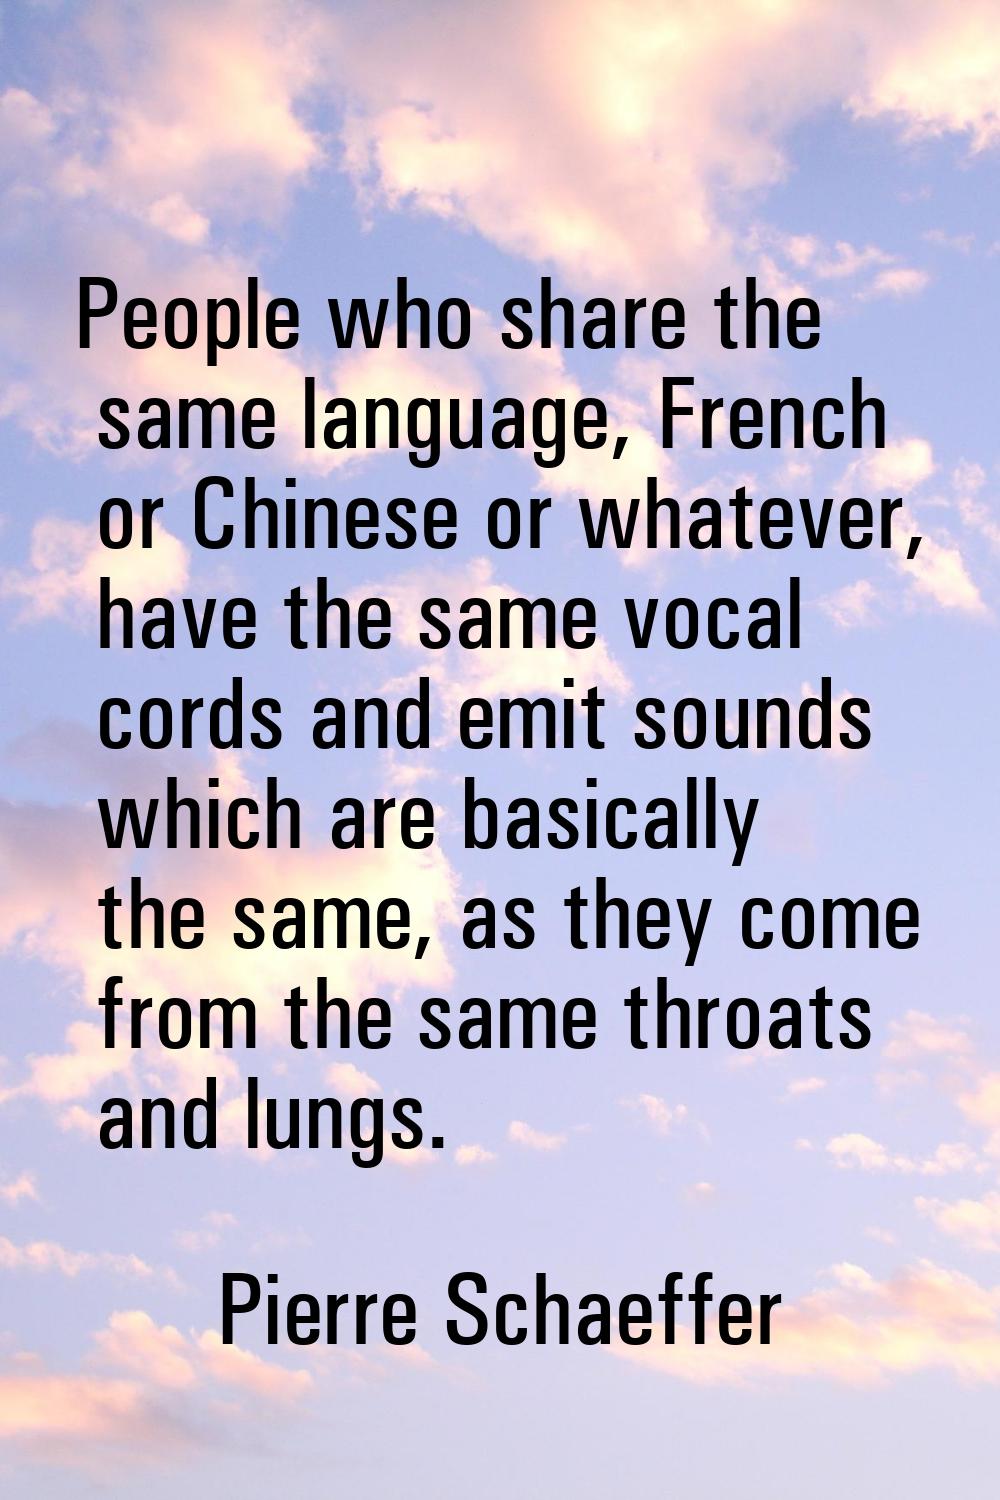 People who share the same language, French or Chinese or whatever, have the same vocal cords and em